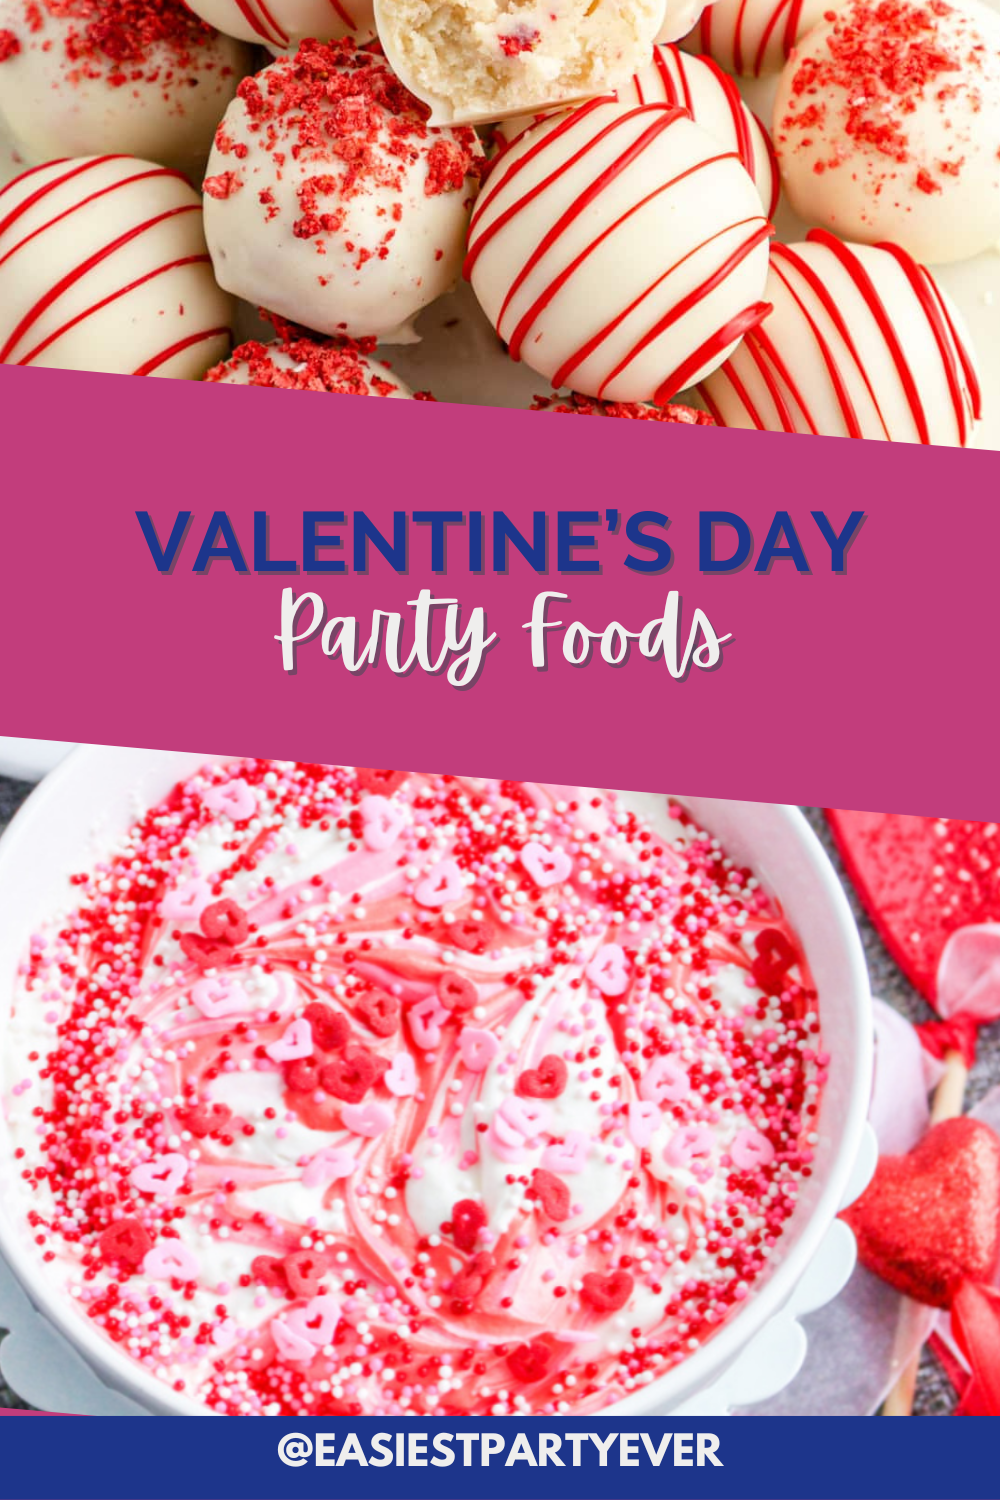 The best valentine’s themed party foods